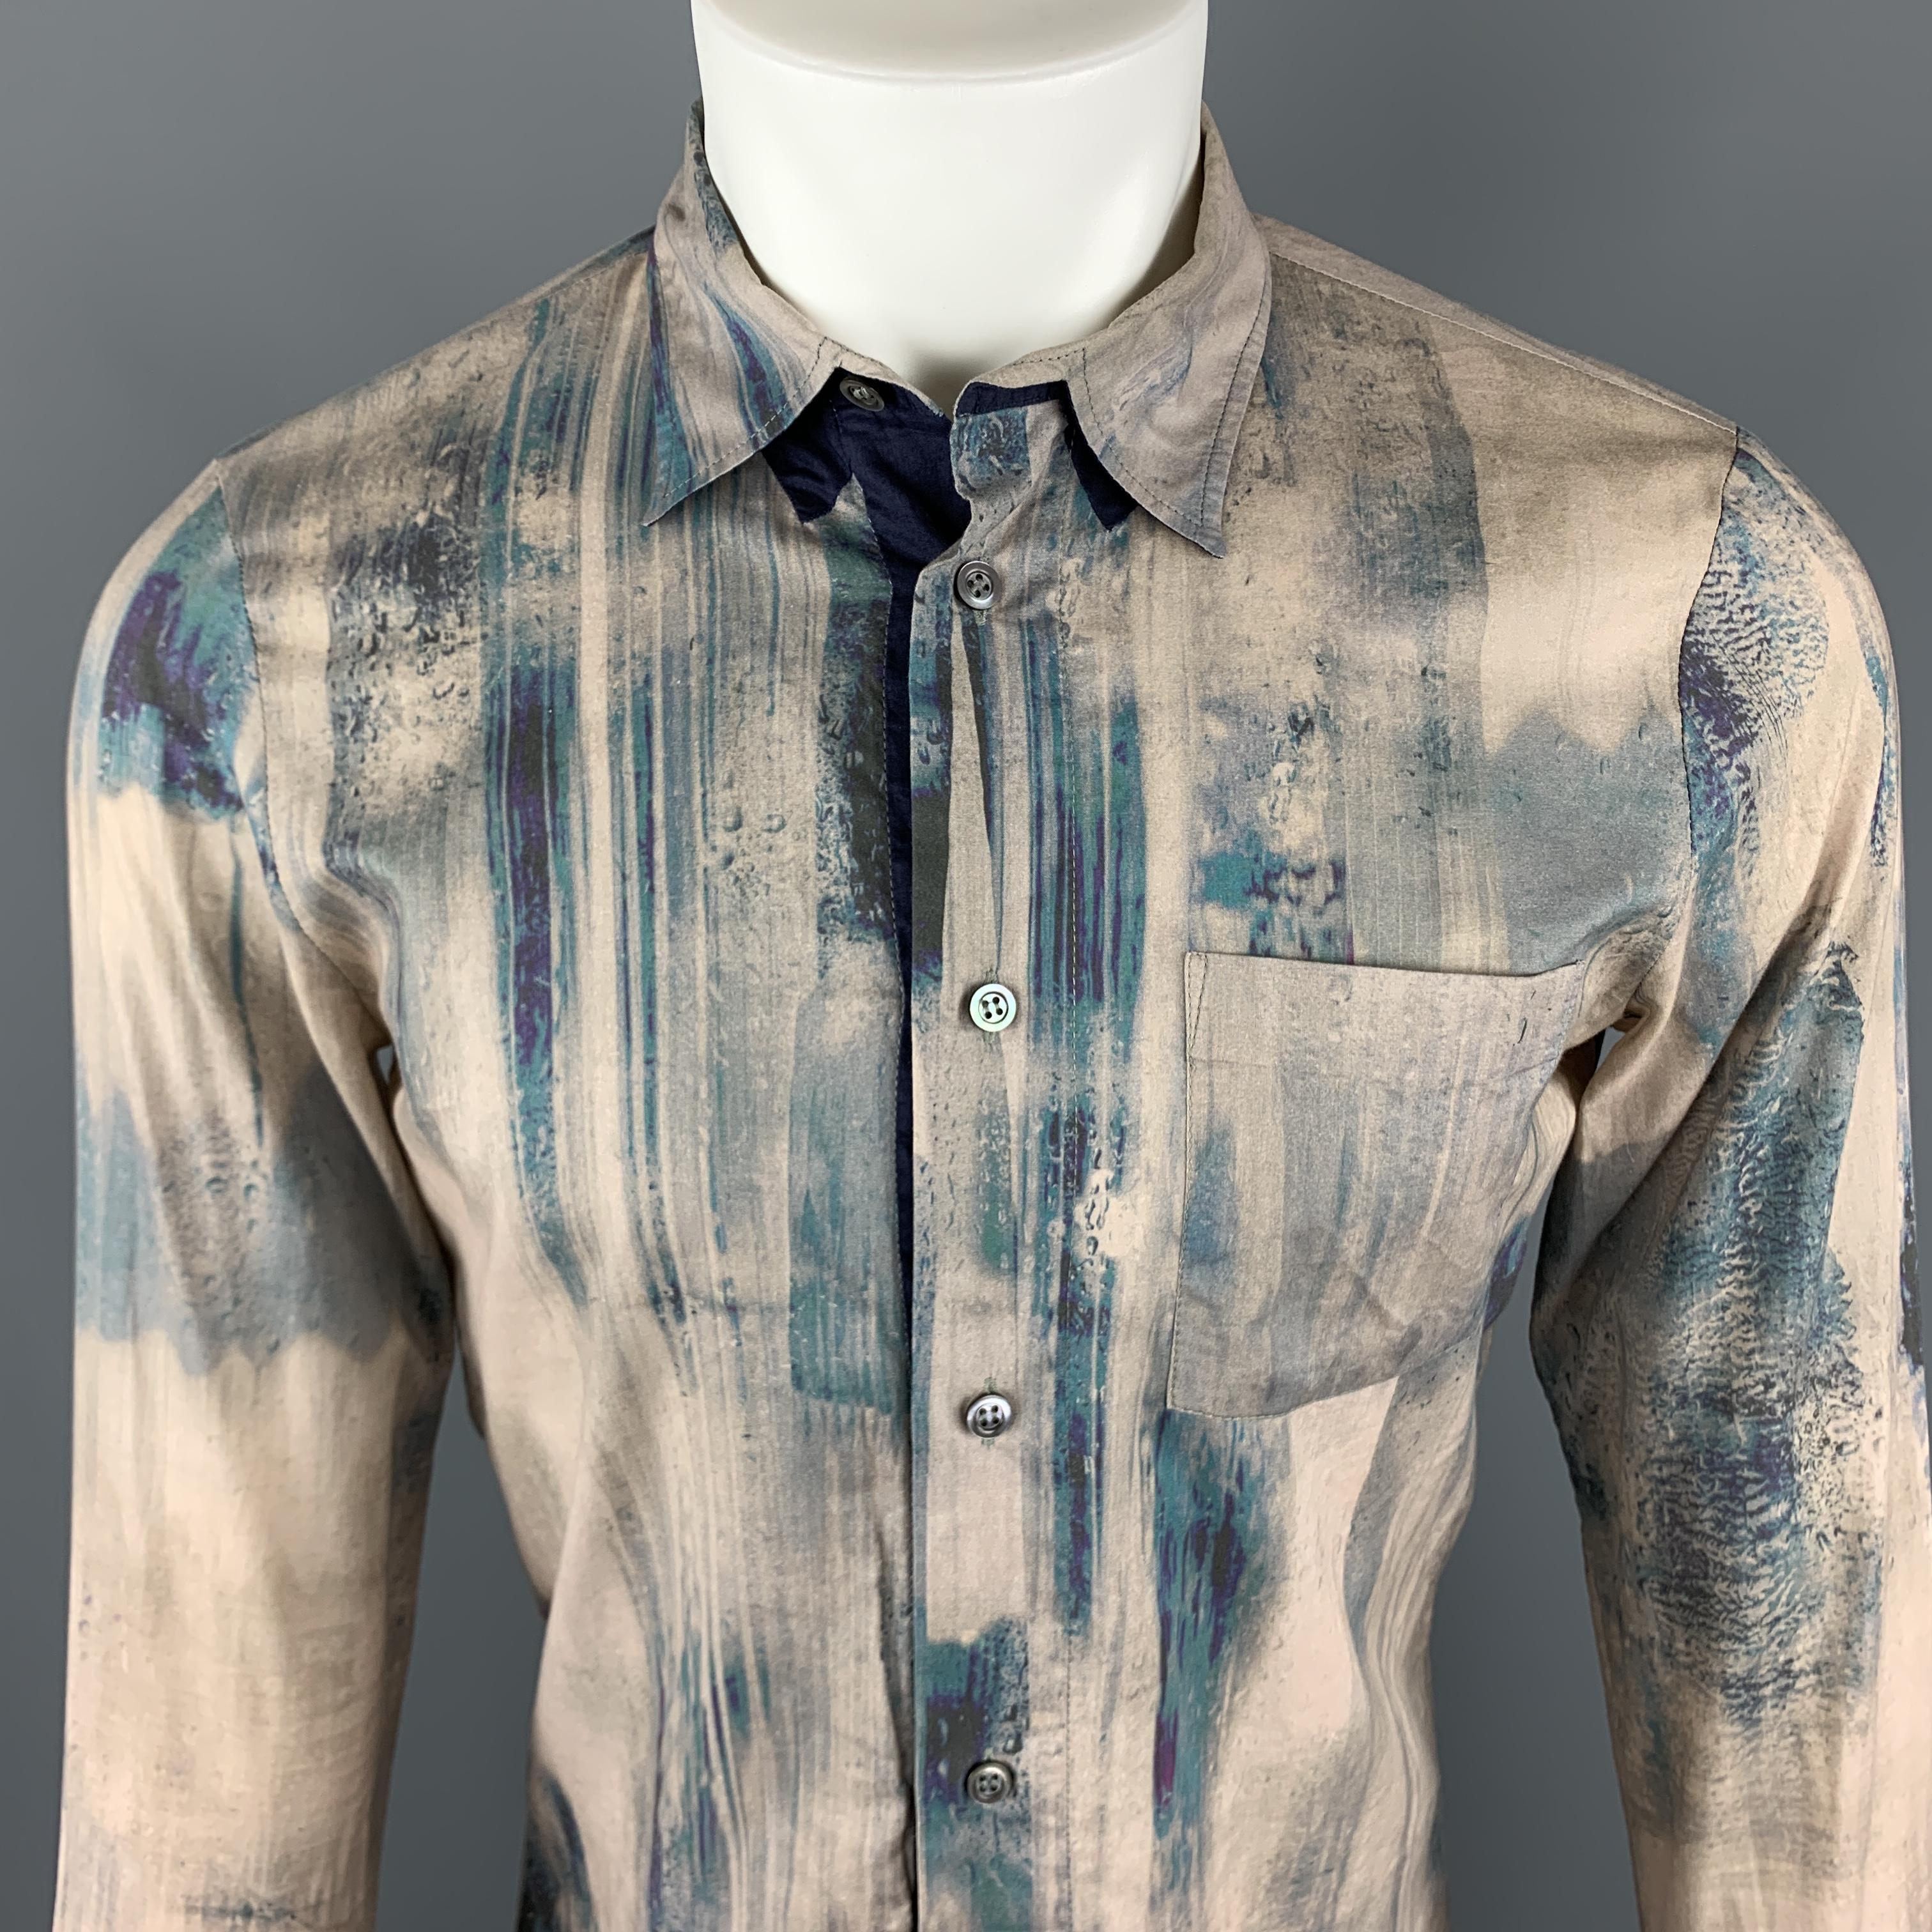 ALEXANDER MCQUEEN Long Sleeve Shirt comes in an abstract print beige and navy cotton material, with a classic collar, a navy trim at inner closure, a patch pocket, buttoned cuffs, button up. Light spot at back of left cuff. Made in Italy.

Very Good